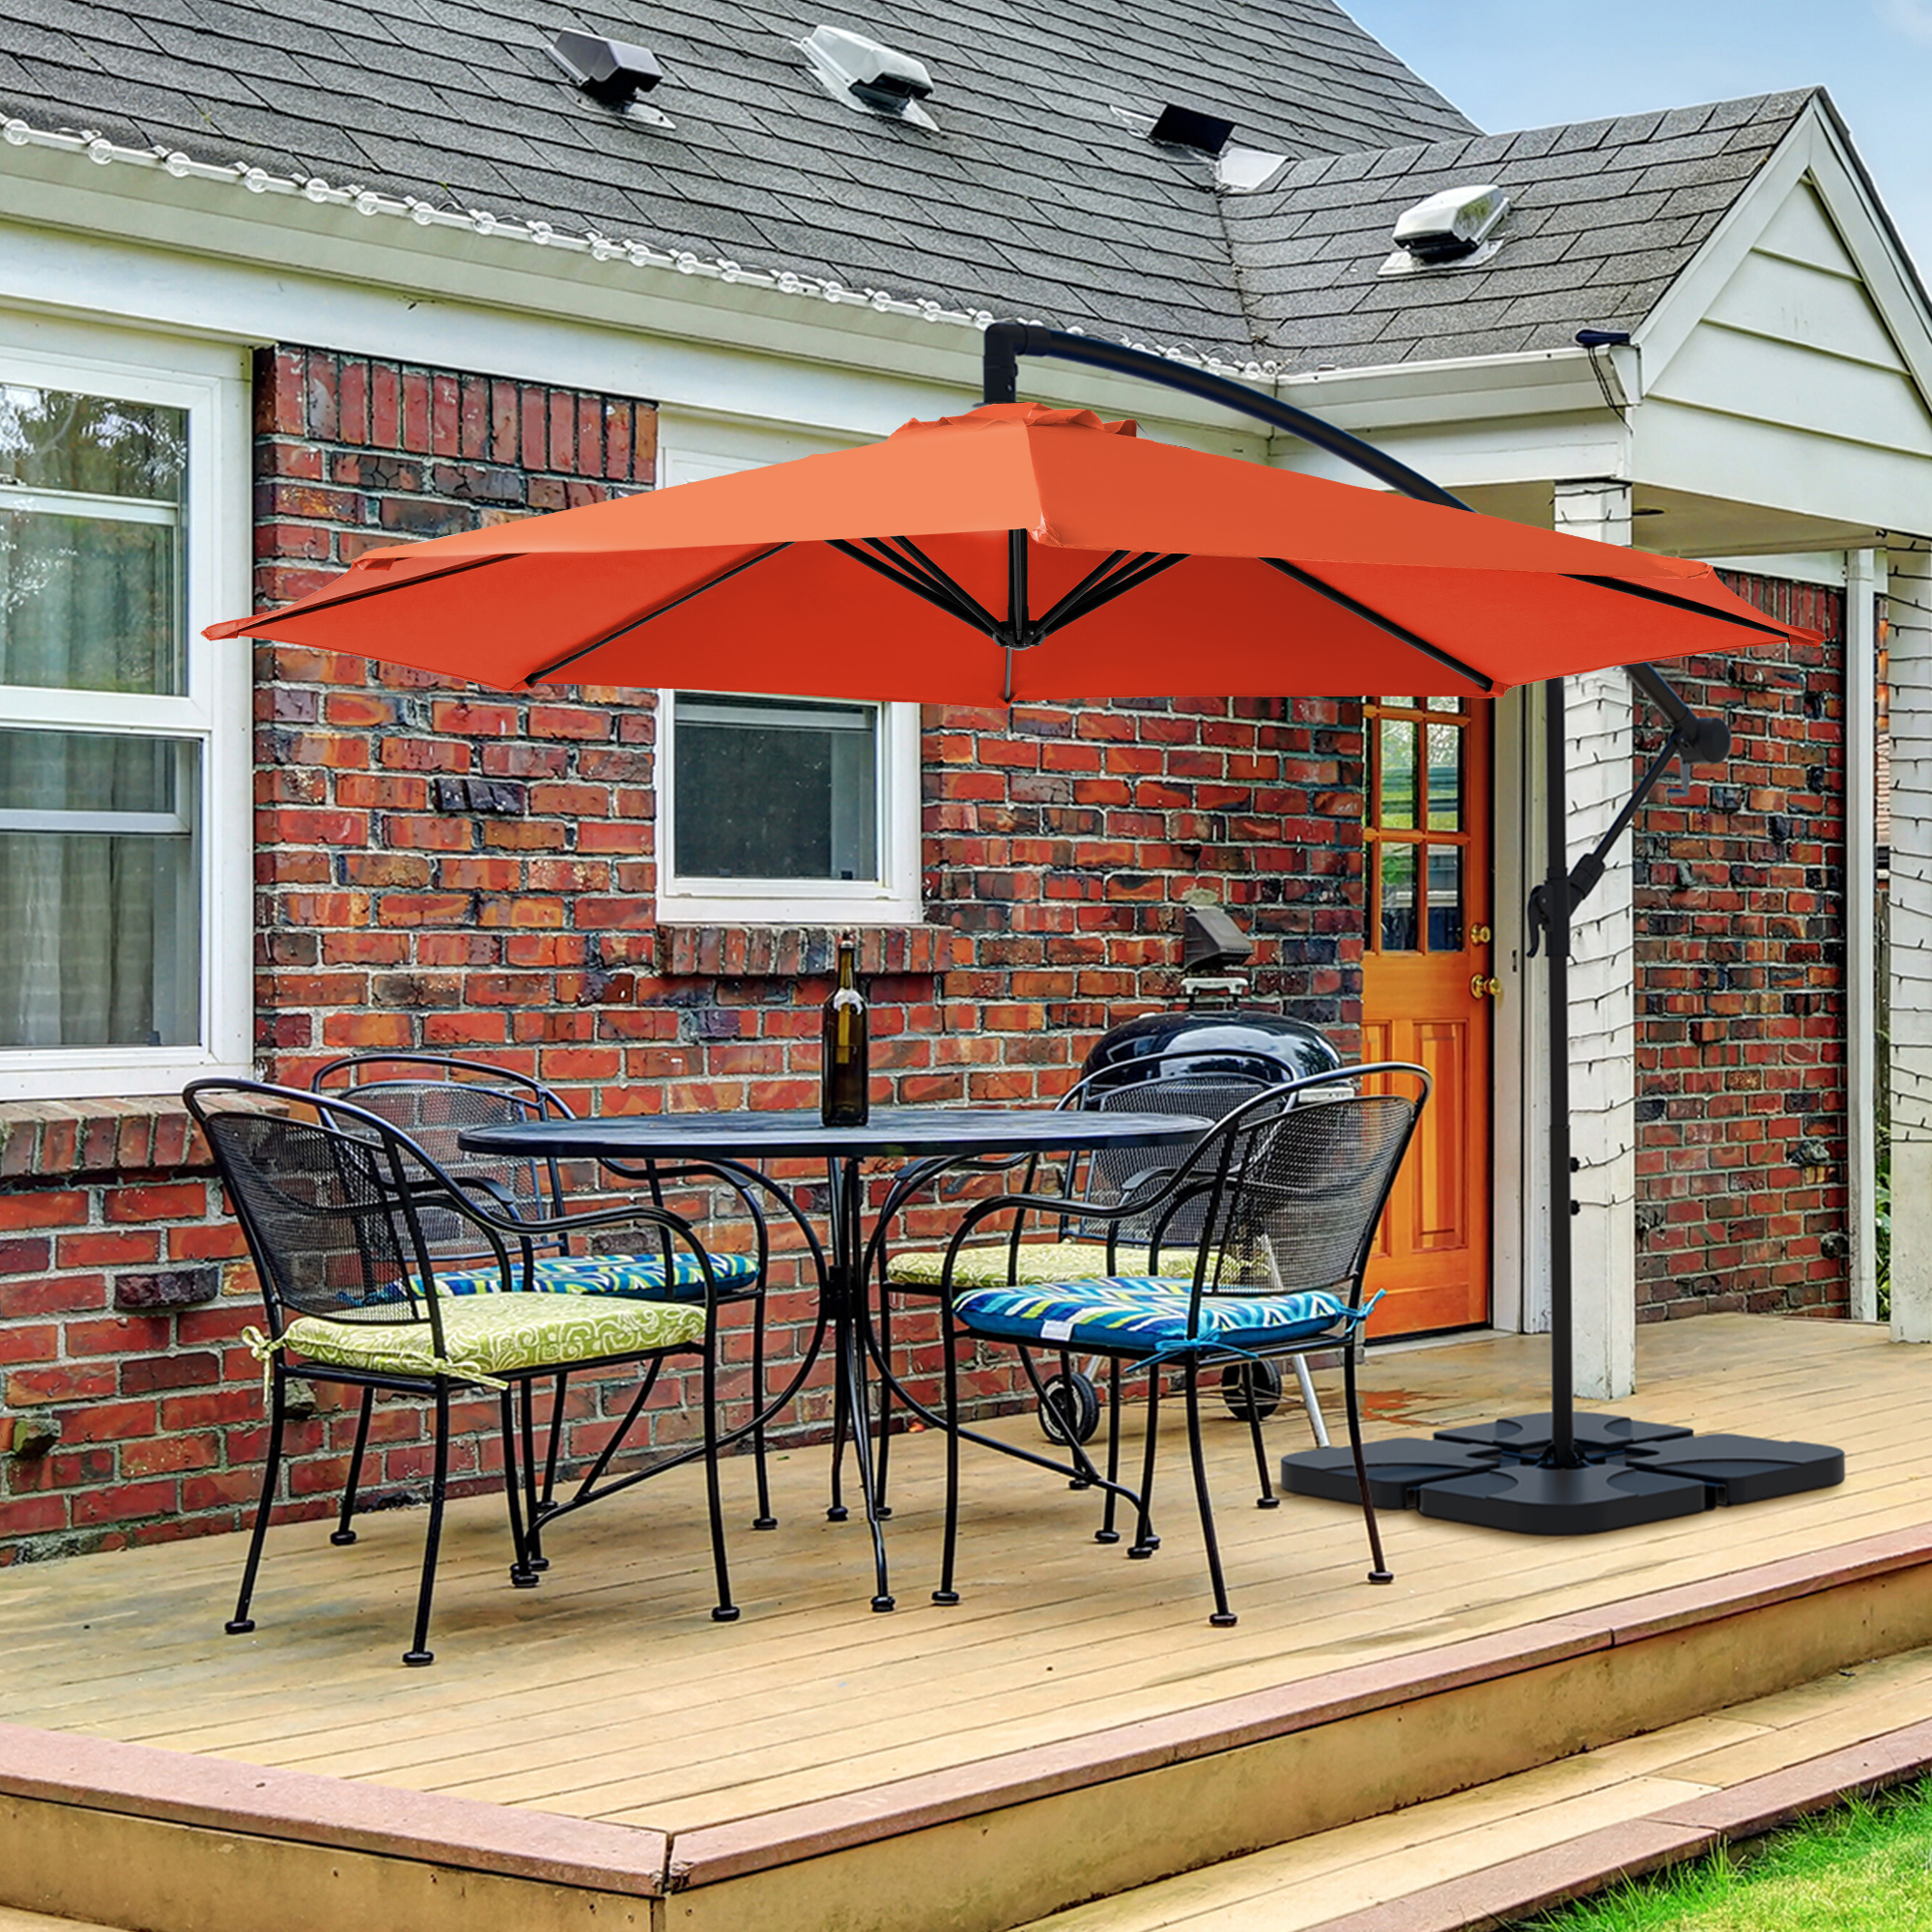 Serwall 10ft Heavy Duty Patio Hanging Offset Cantilever Patio Umbrella W/ Base Included, Orange - image 1 of 6